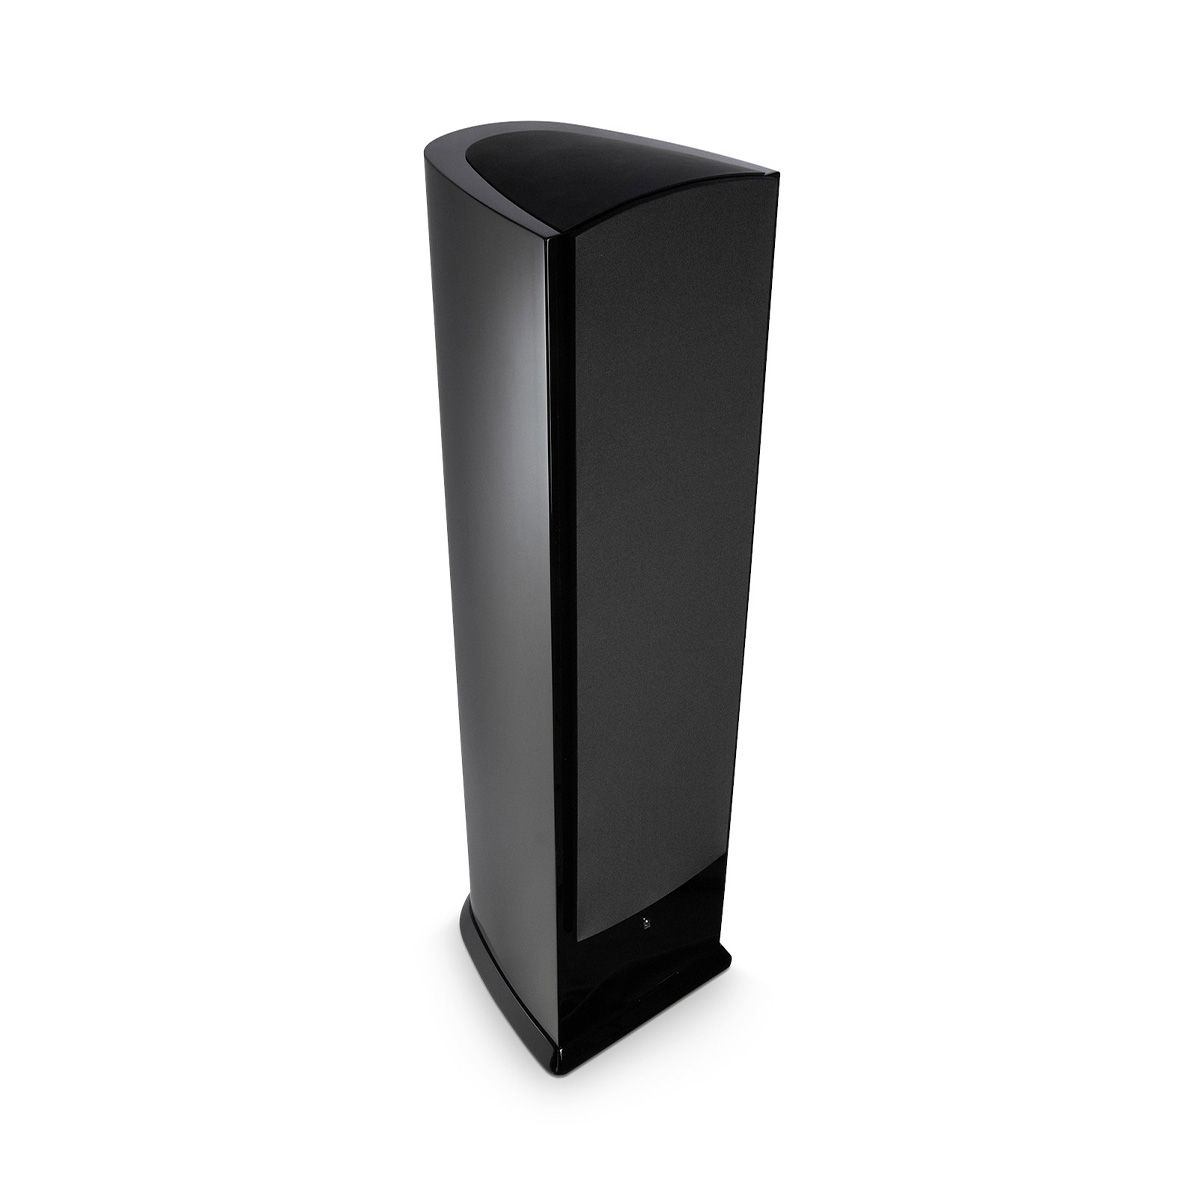 Revel F208 3-Way Floorstanding Tower Loudspeaker - single black with grille - angled front view